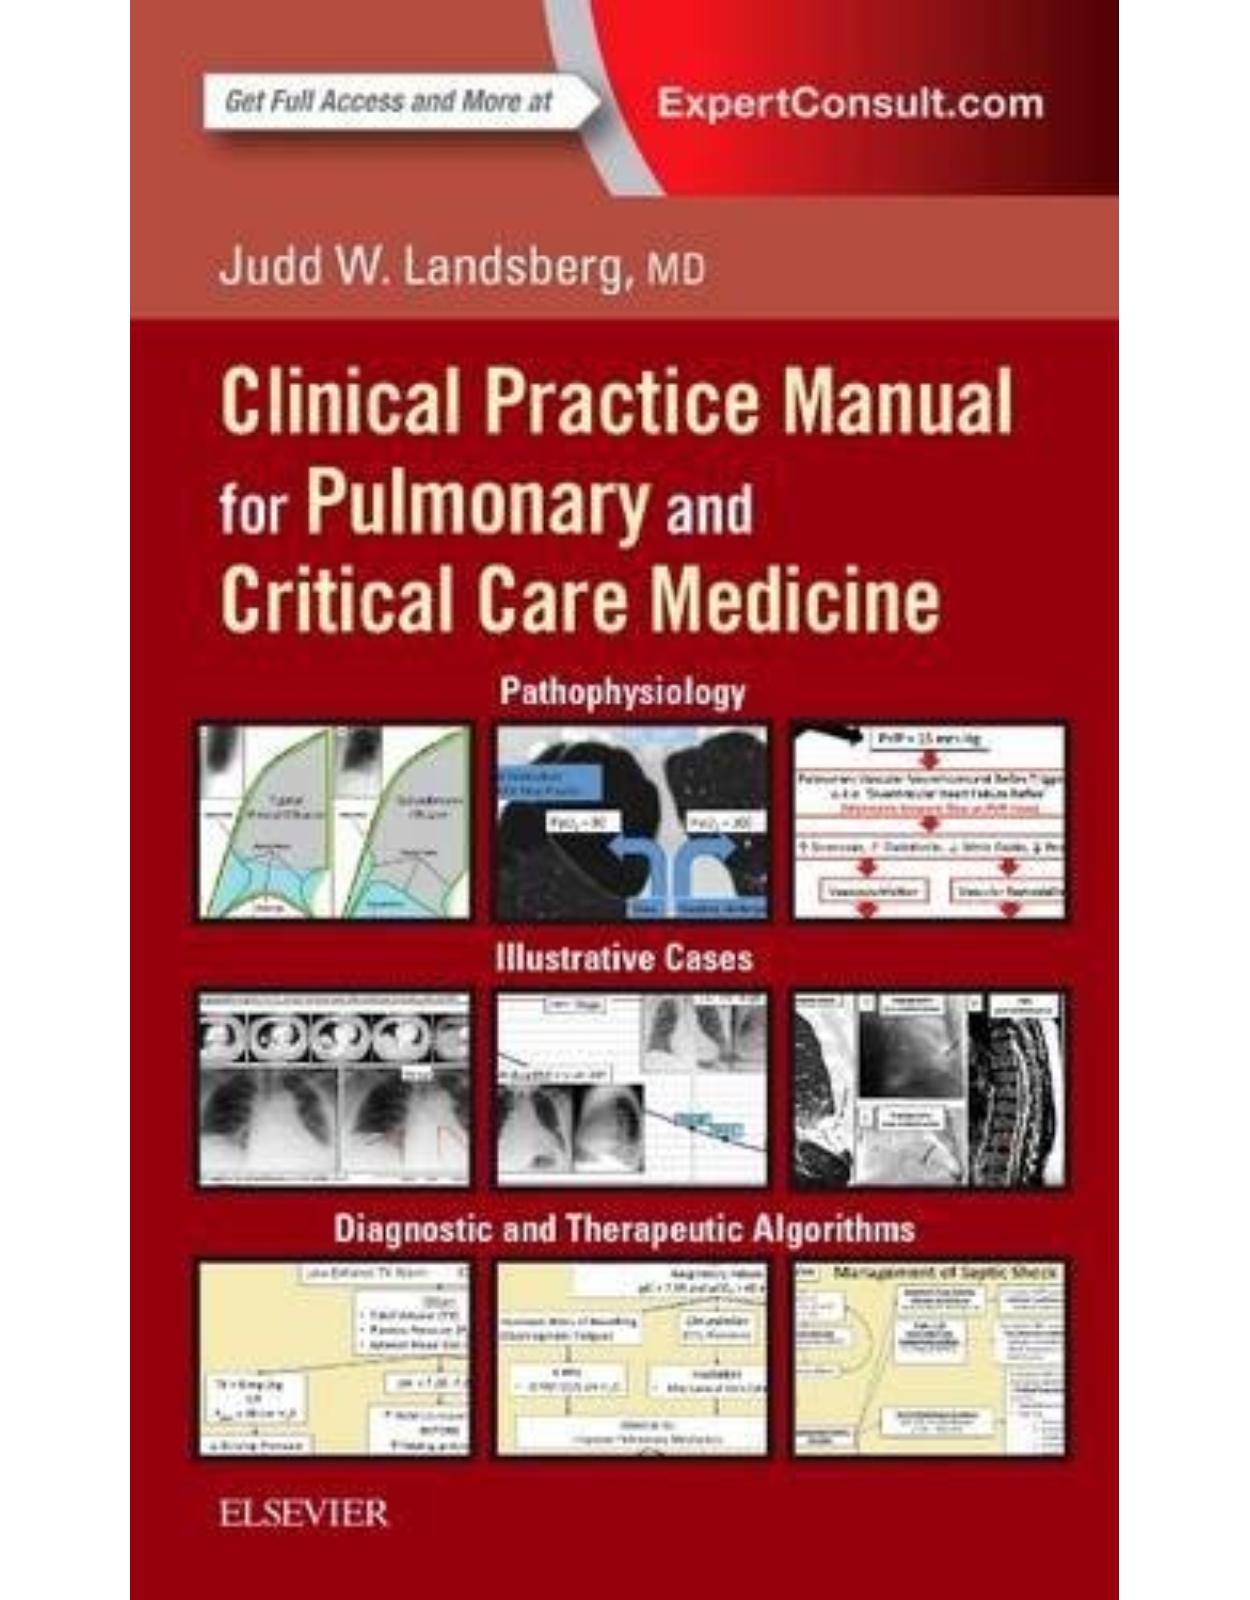 Clinical Practice Manual for Pulmonary and Critical Care Medicine, 1e